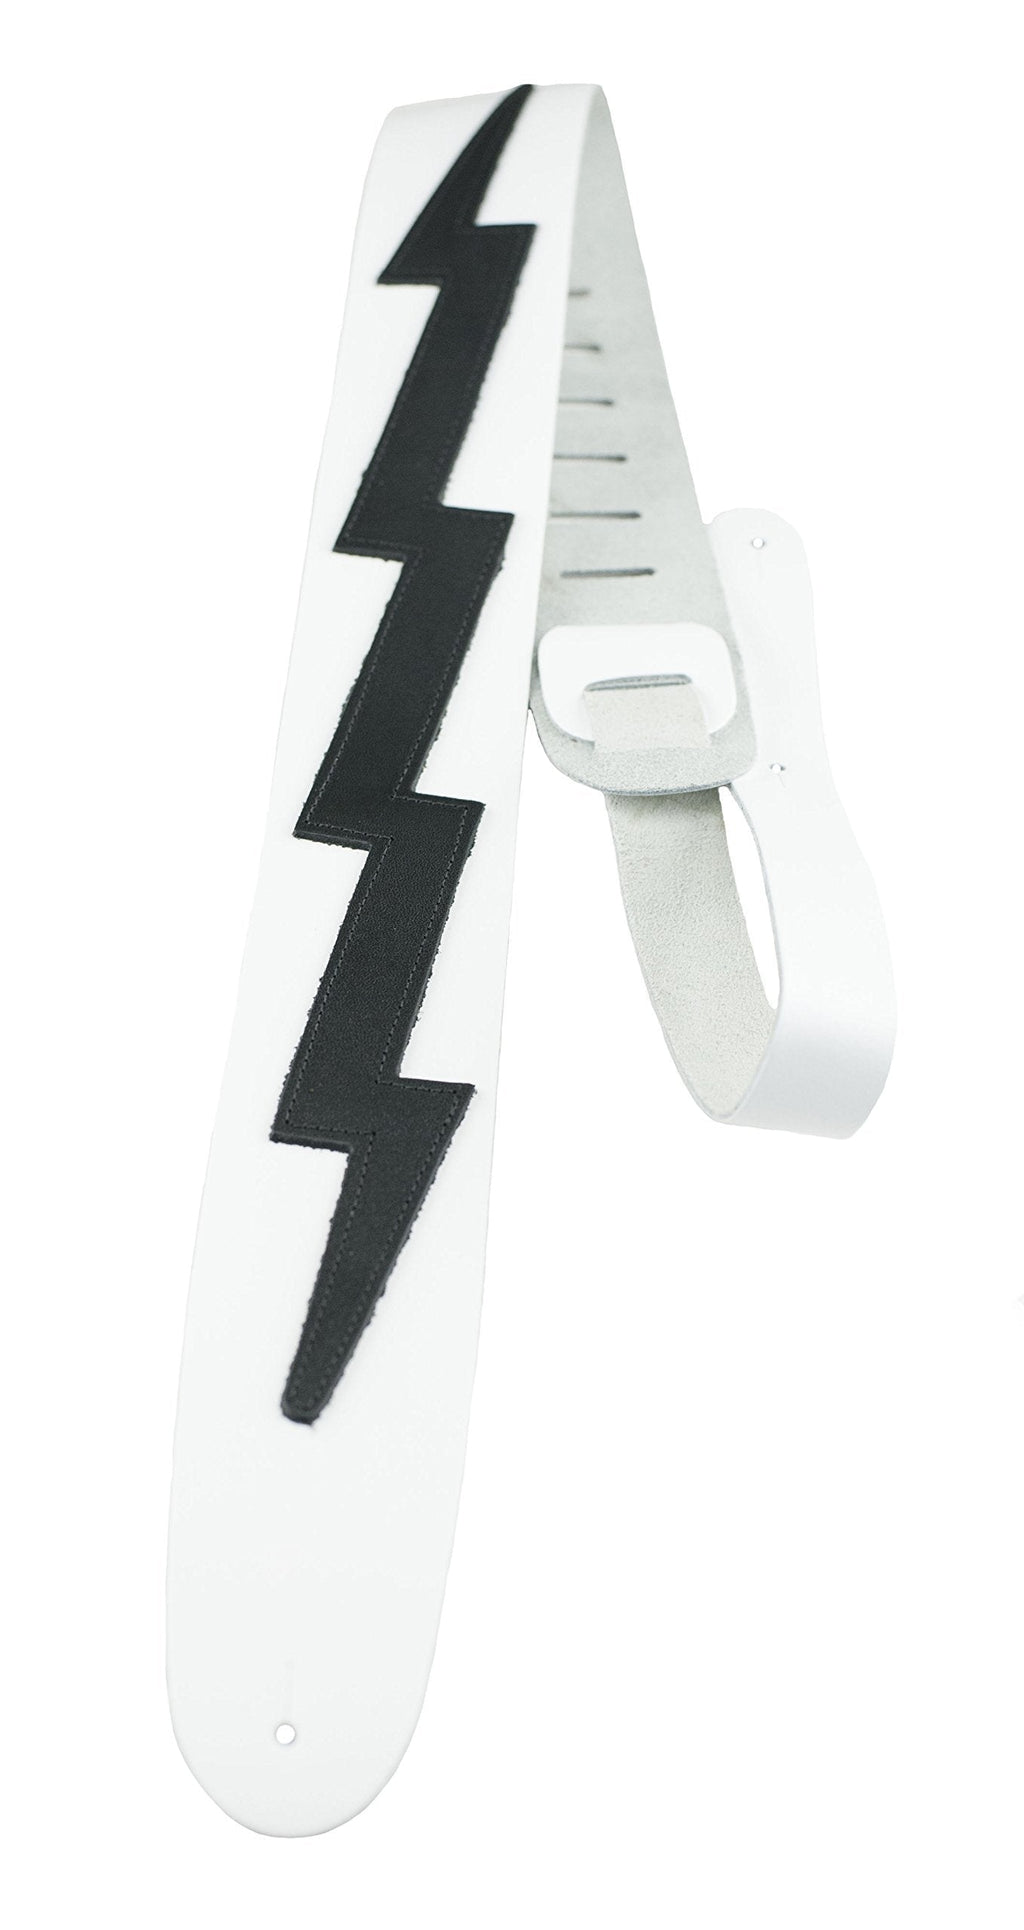 Perri's Leathers Lightning Bolt Famous Guitar Strap, White & Black Leather, 2.5” inches Wide, Adjustable Length 41.5" to 56" inches White with Black Lightning Bolt